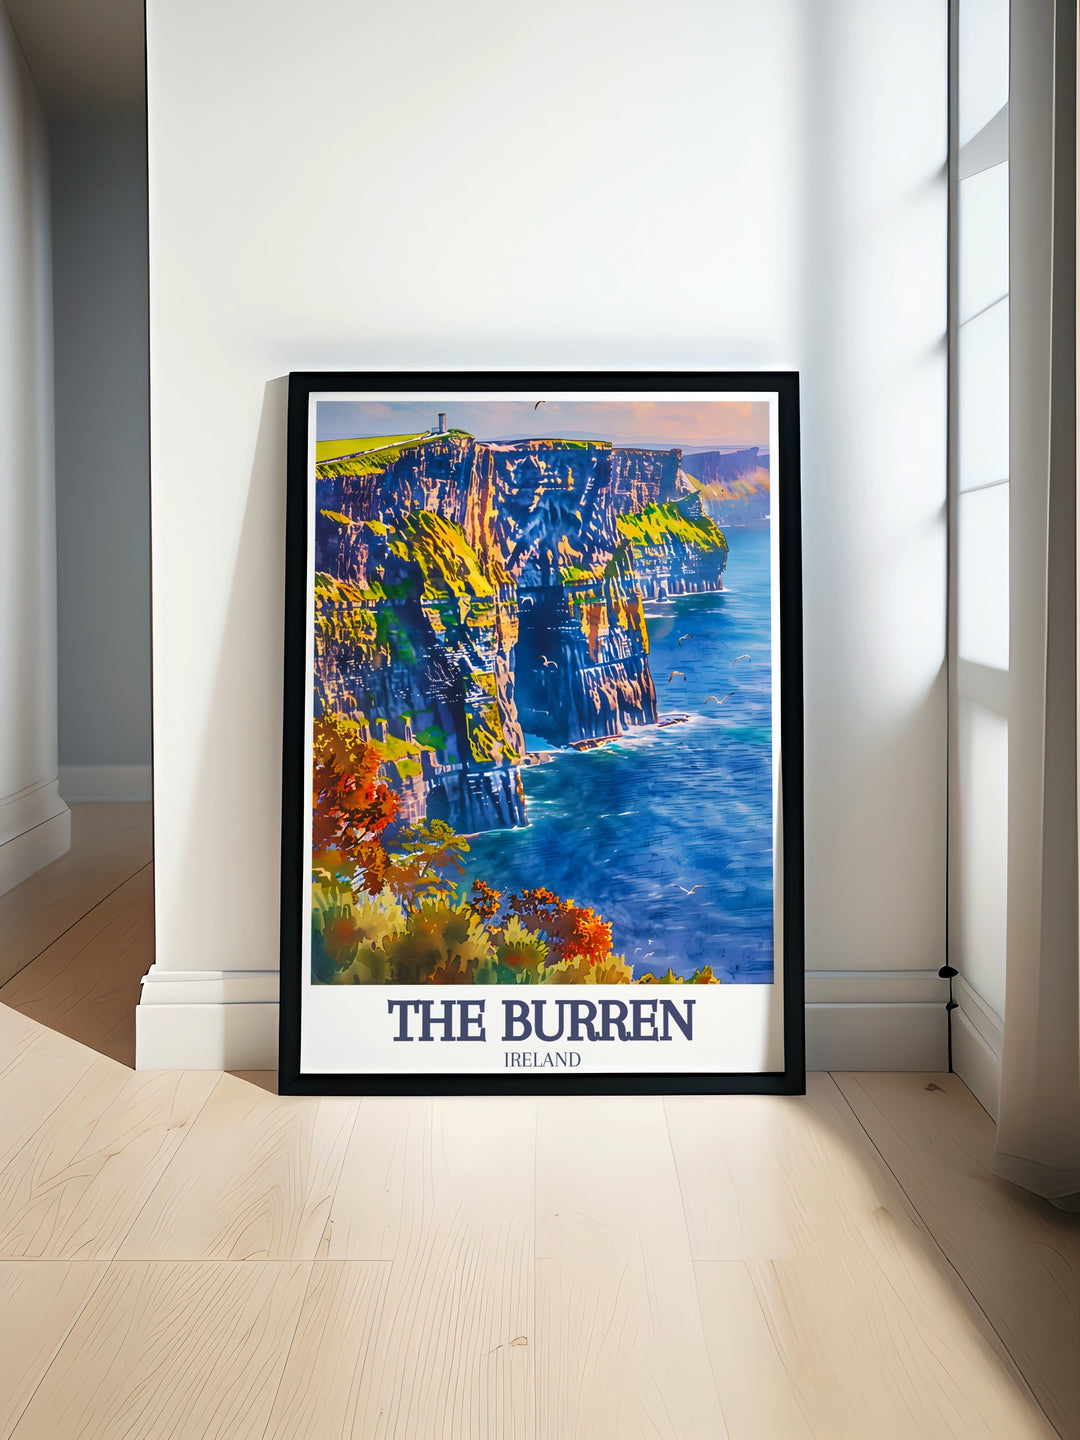 Stunning art print of Burren National Park County Clare showcasing the natural beauty of Irelands rugged landscape paired with the dramatic Cliffs of Moher Atlantic Ocean perfect for wall decor and a thoughtful gift